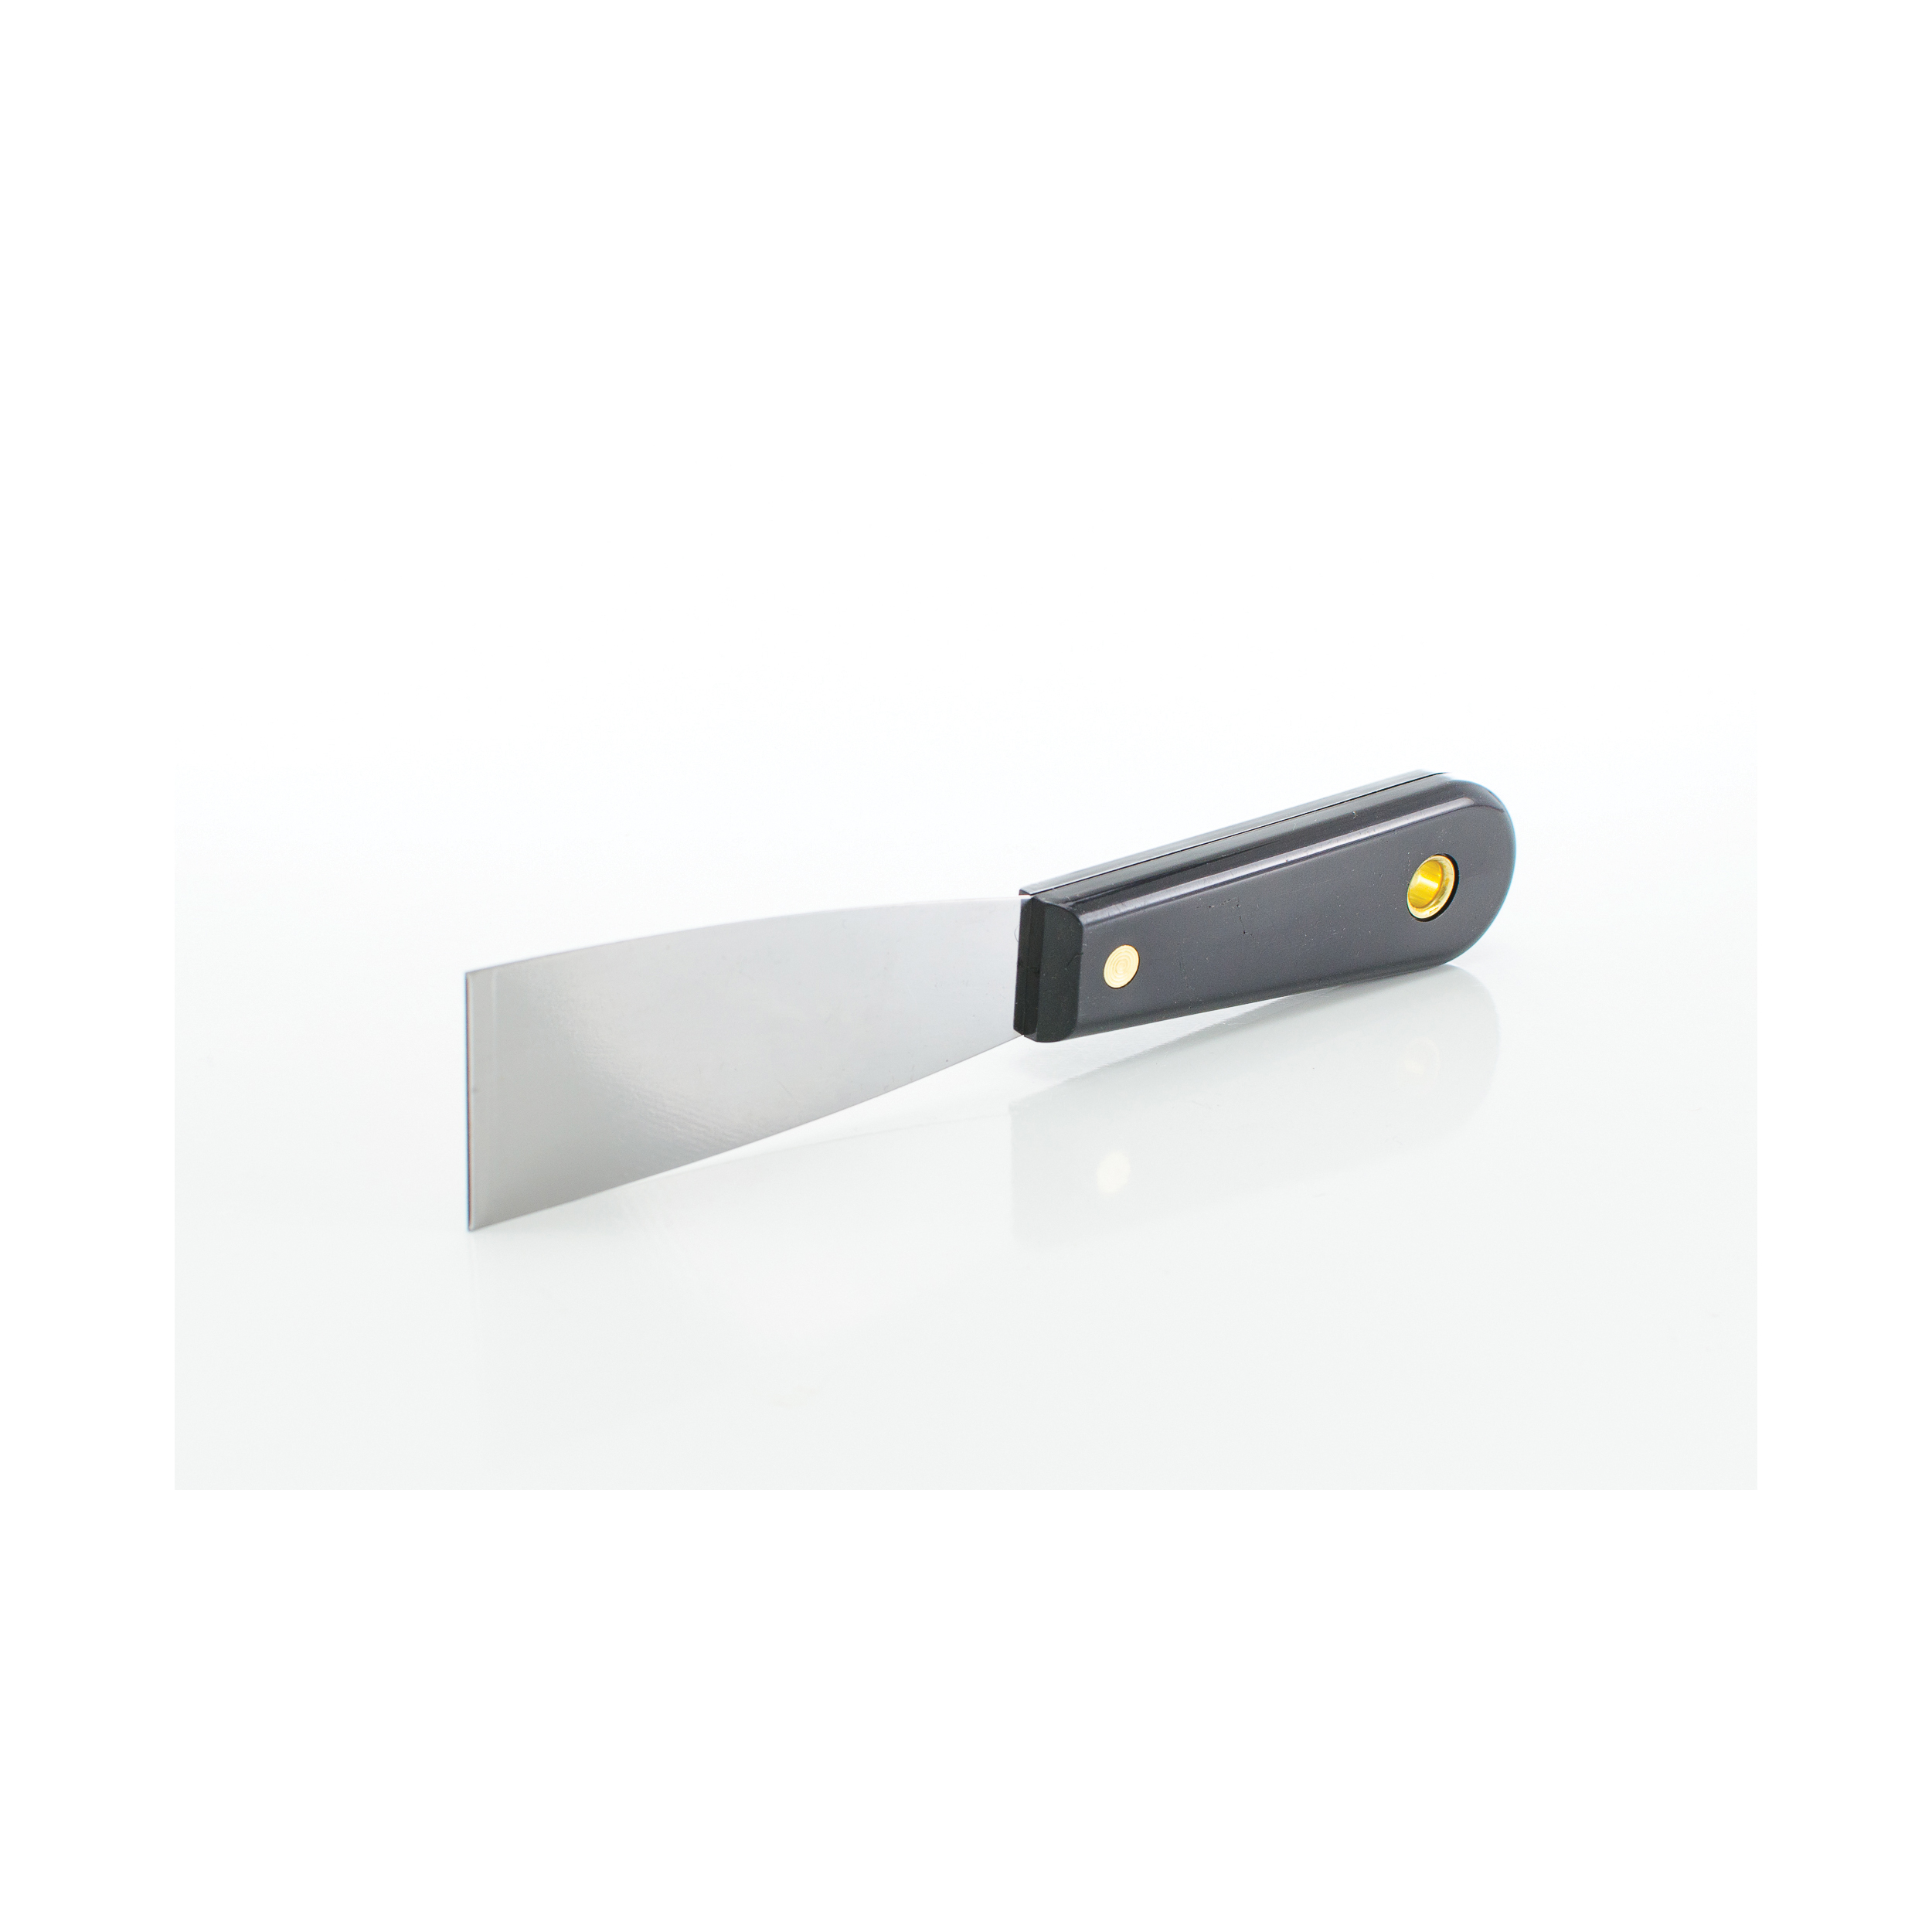 PASCO 4116 Putty Knife, High Carbon Cutlery Steel Blade